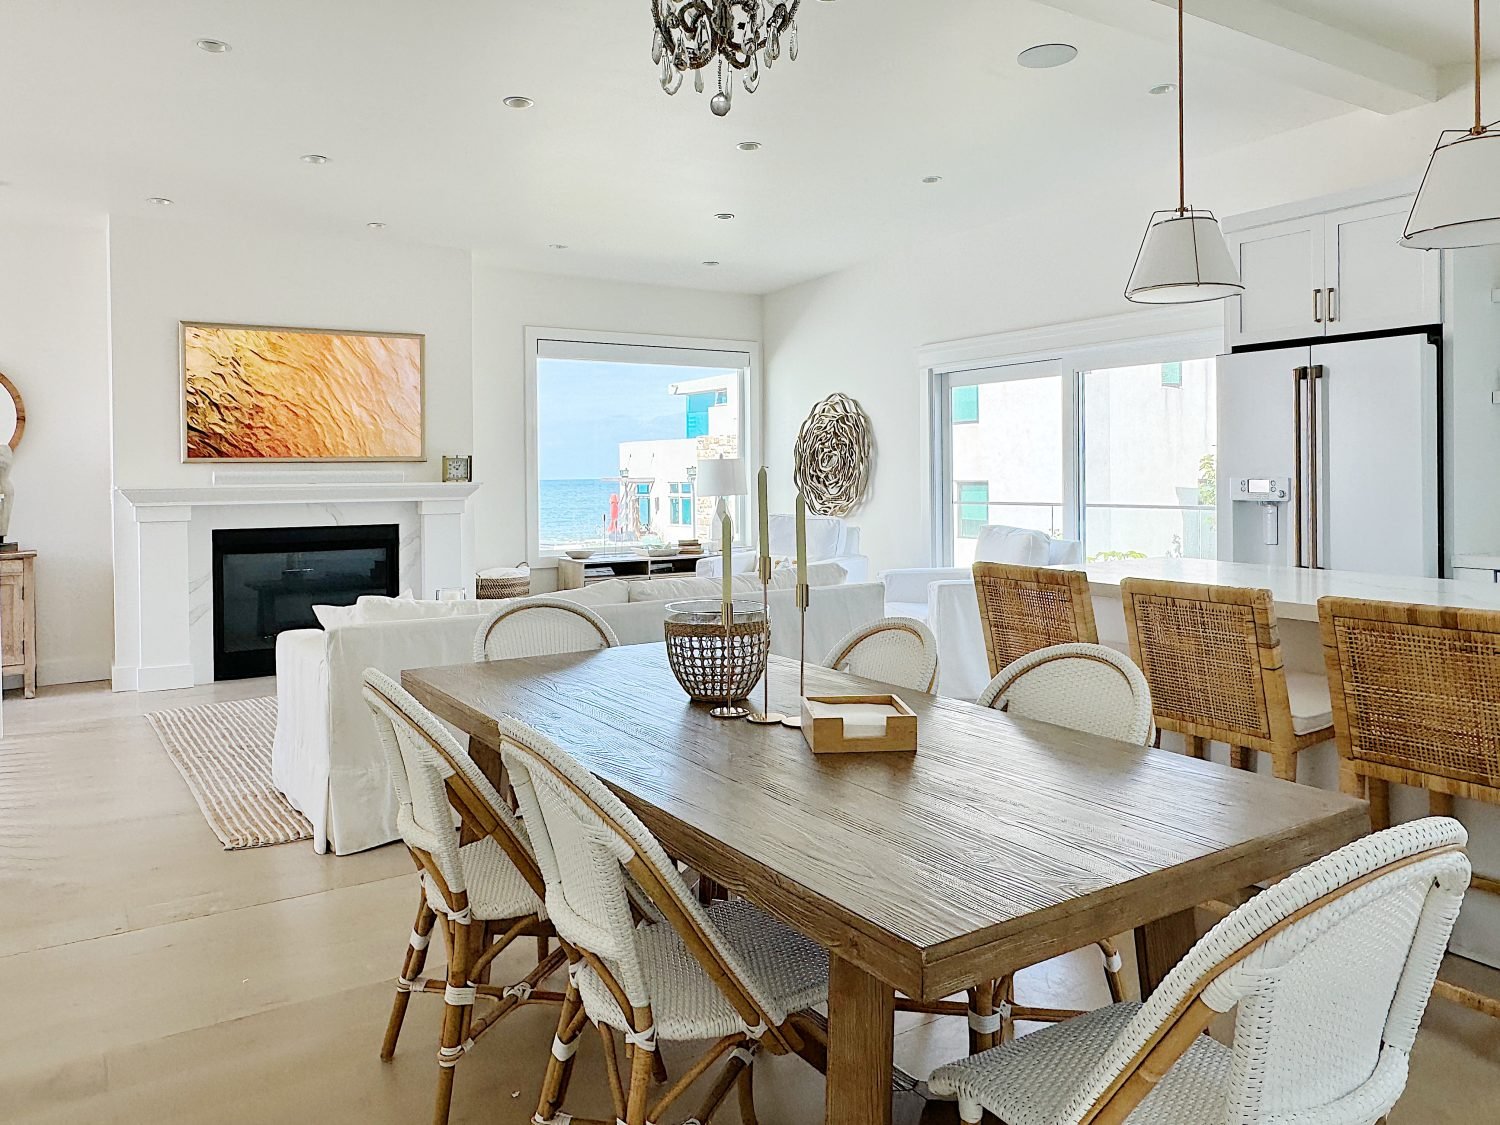 Bright, modern living room with a dining area, featuring a wooden table, white chairs, a fireplace, and a large screen displaying art.